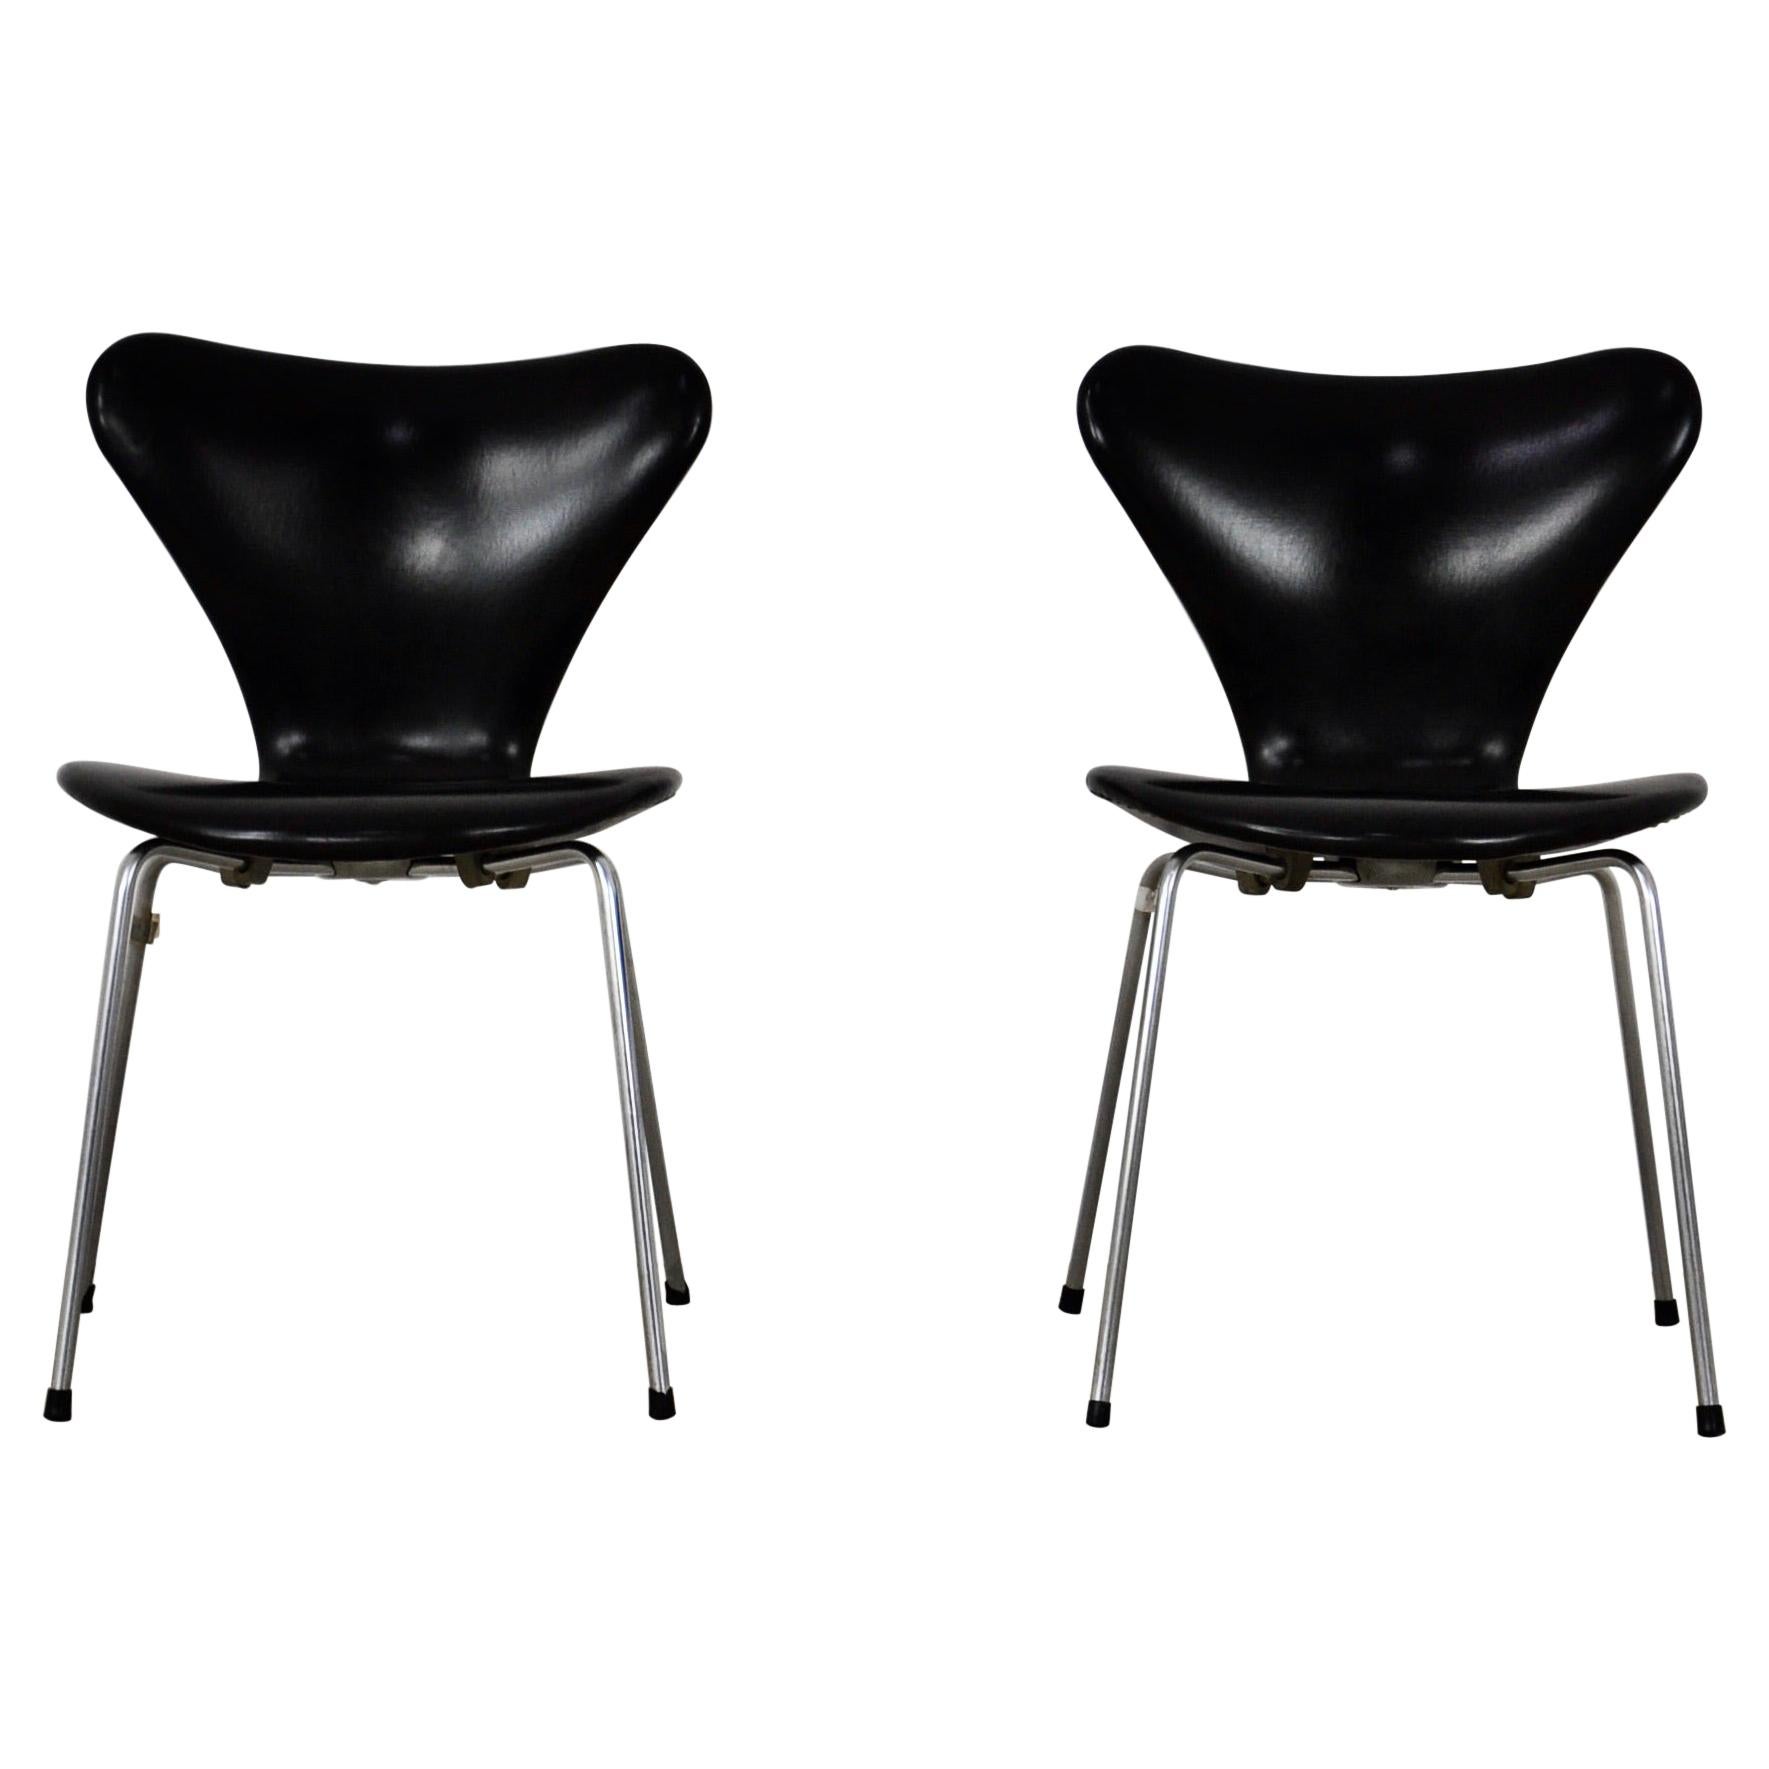 Leather 3107 Dining Chairs by Arne Jacobsen for Fritz Hansen, 1960s